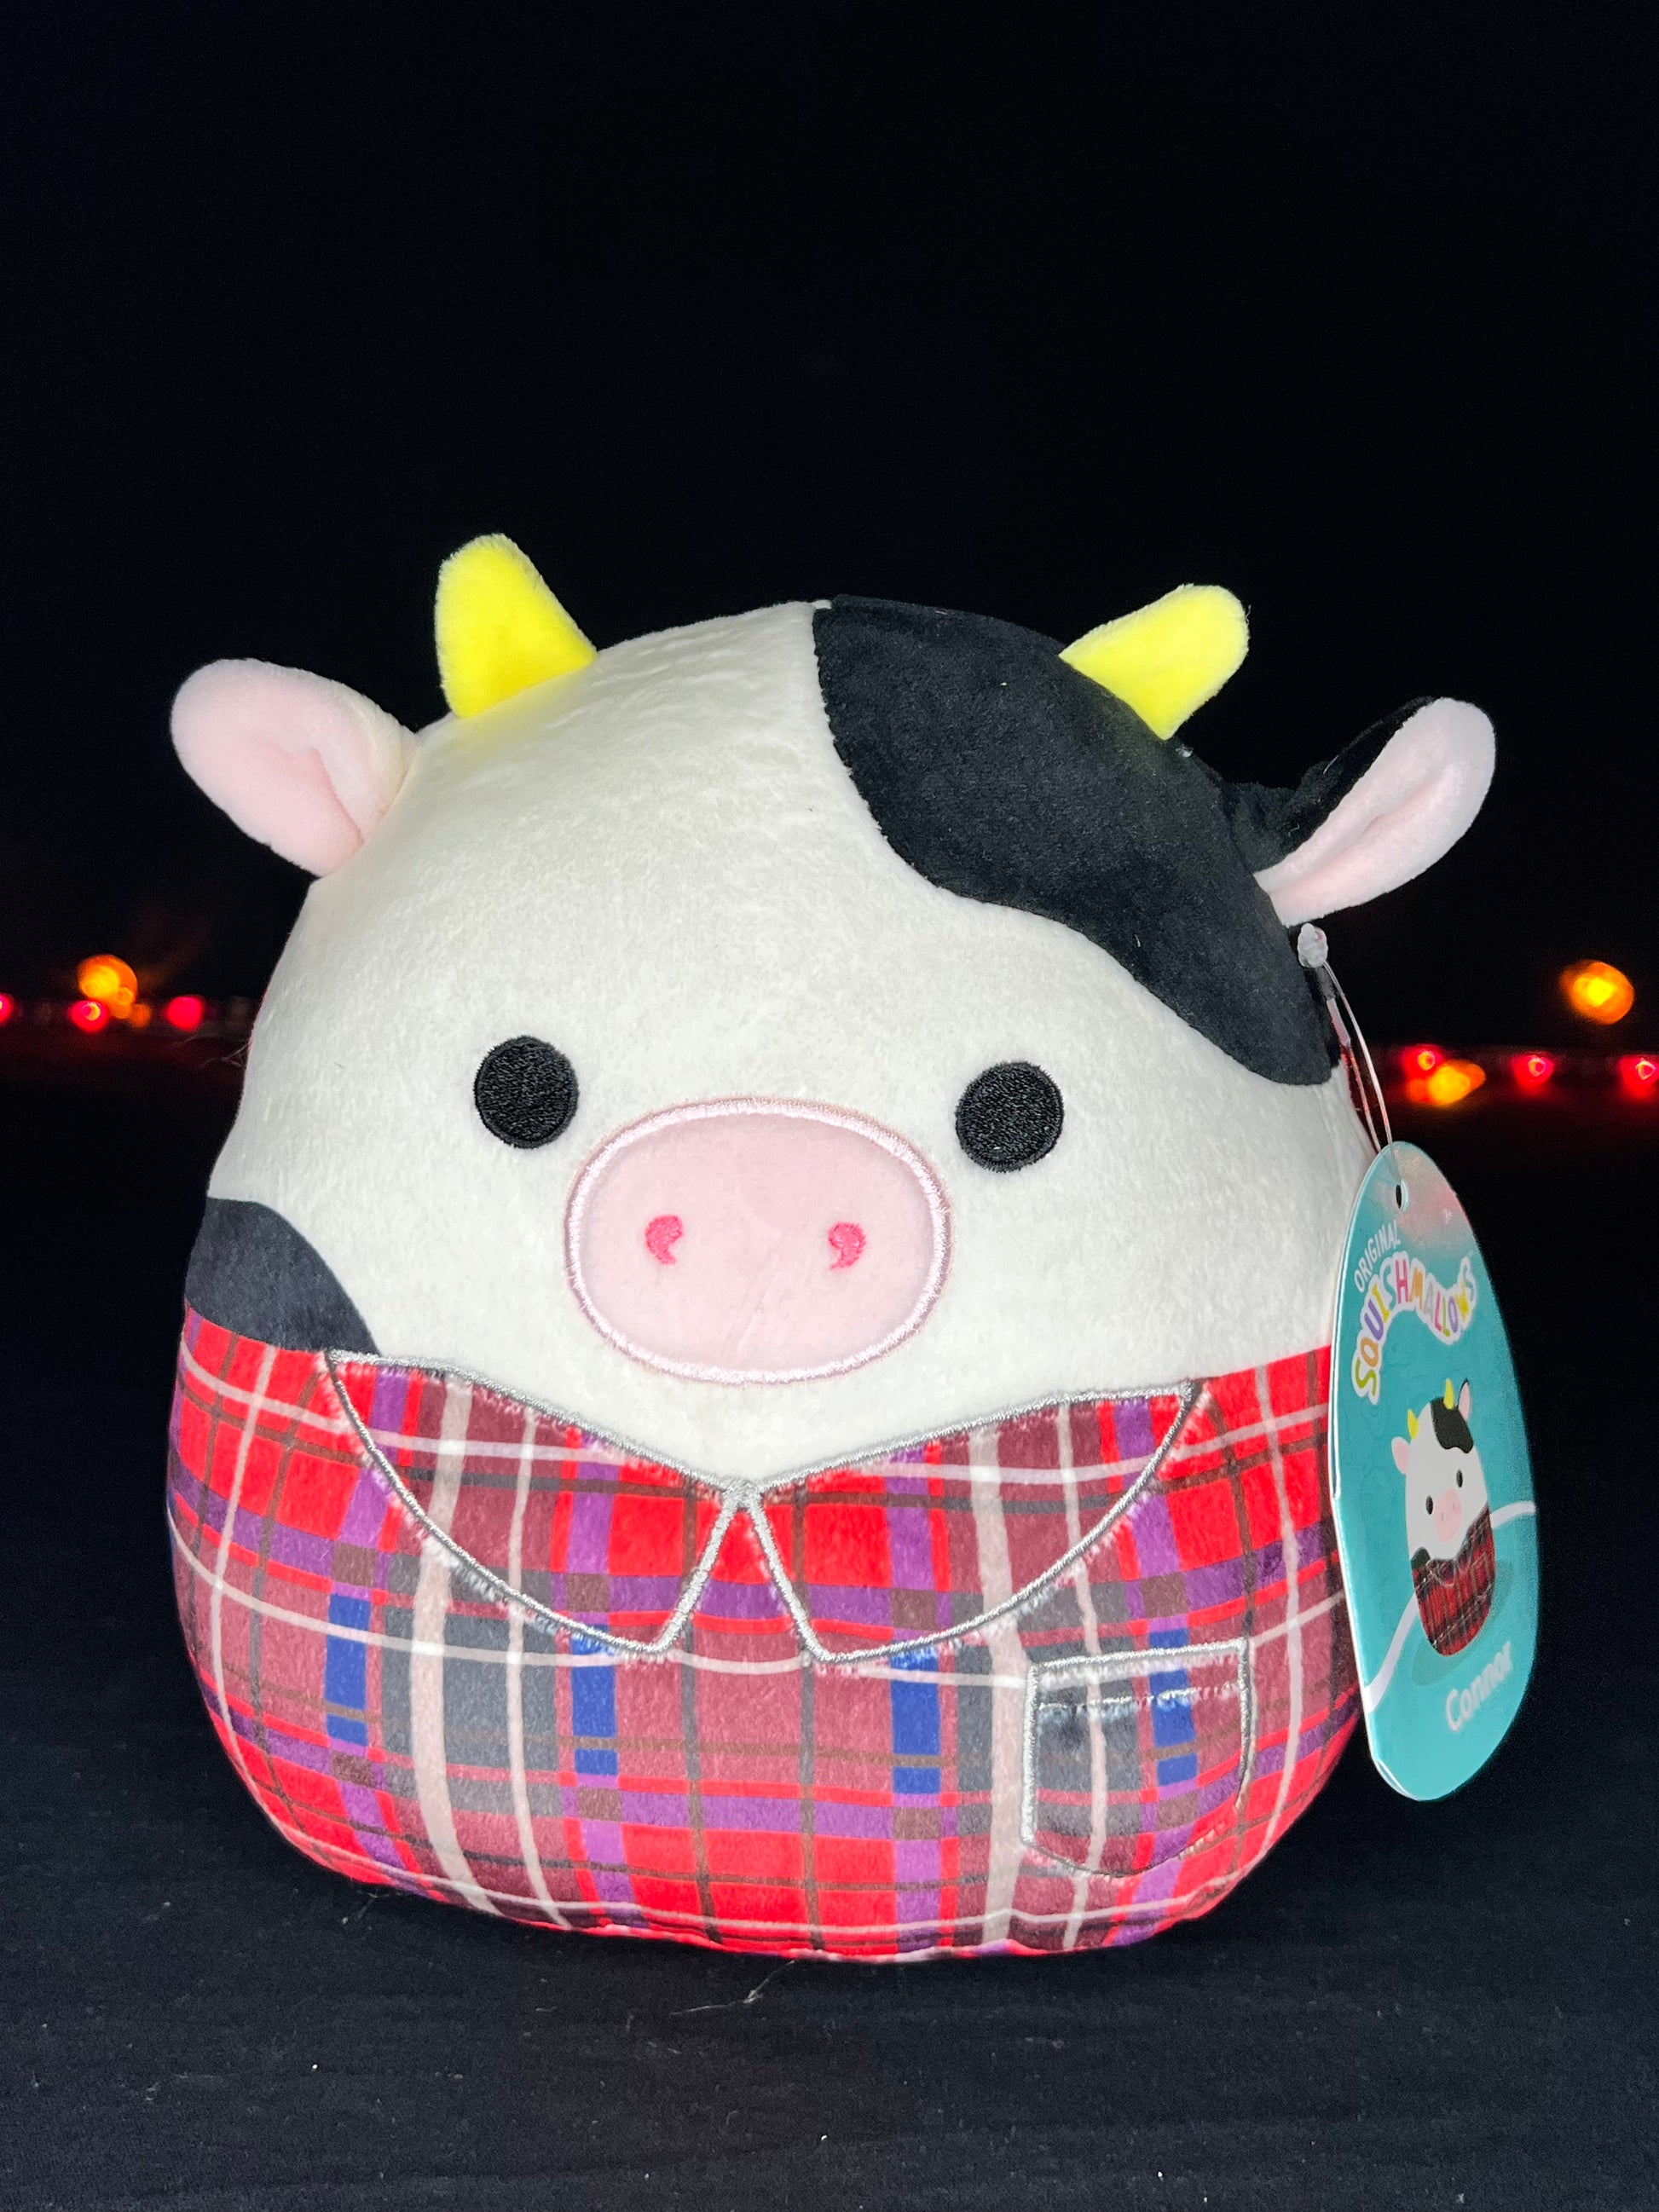 Squishmallow 7” Connor the Cow Fall Edition.